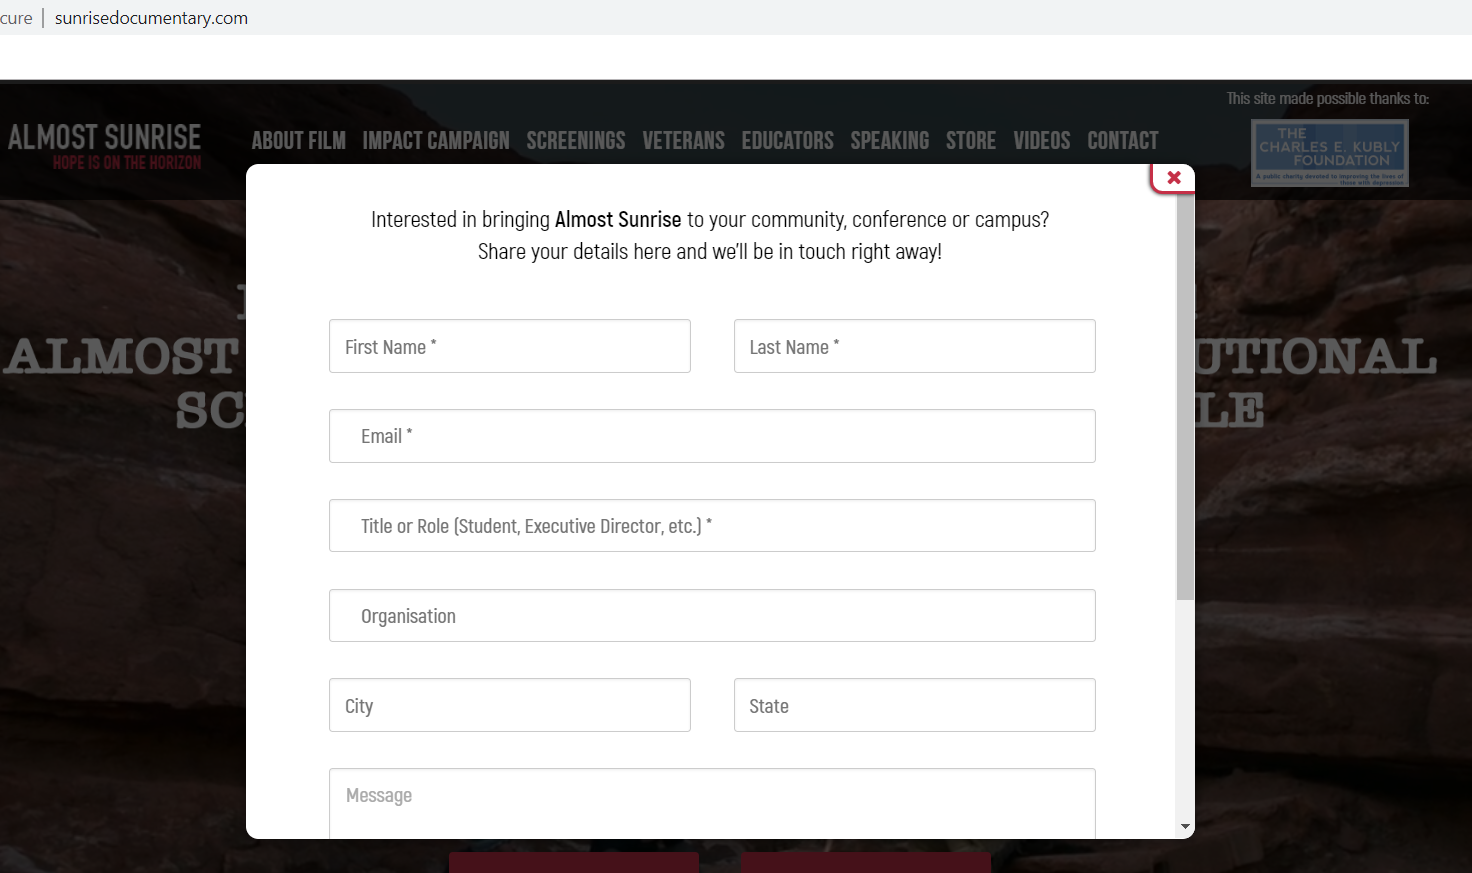 Embedded Forms coming up blank Image 1 Screenshot 20